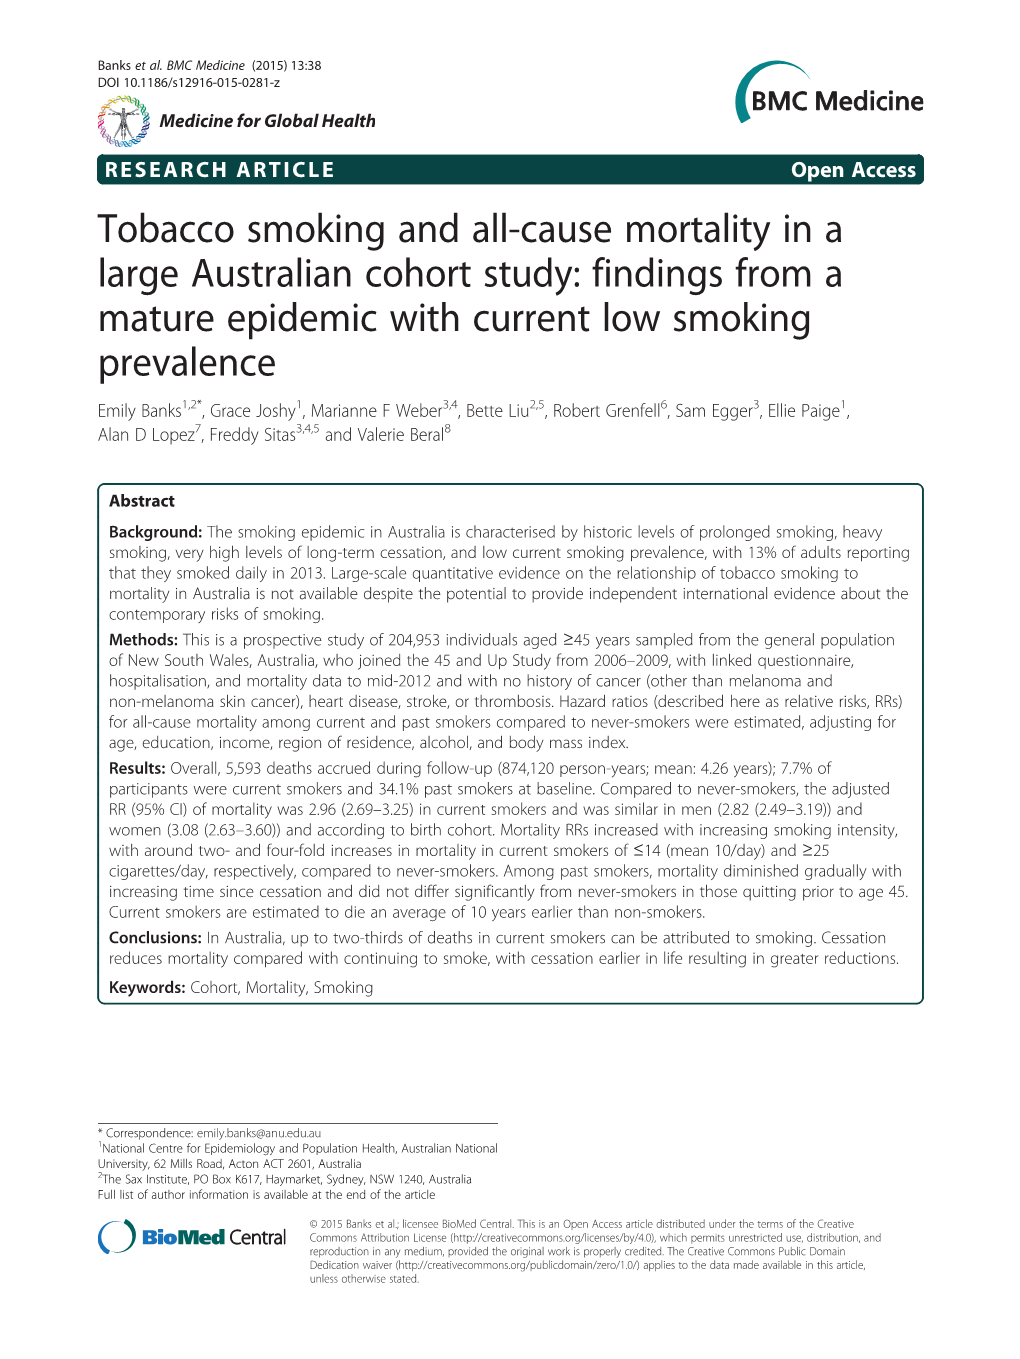 Tobacco Smoking and All-Cause Mortality in a Large Australian Cohort